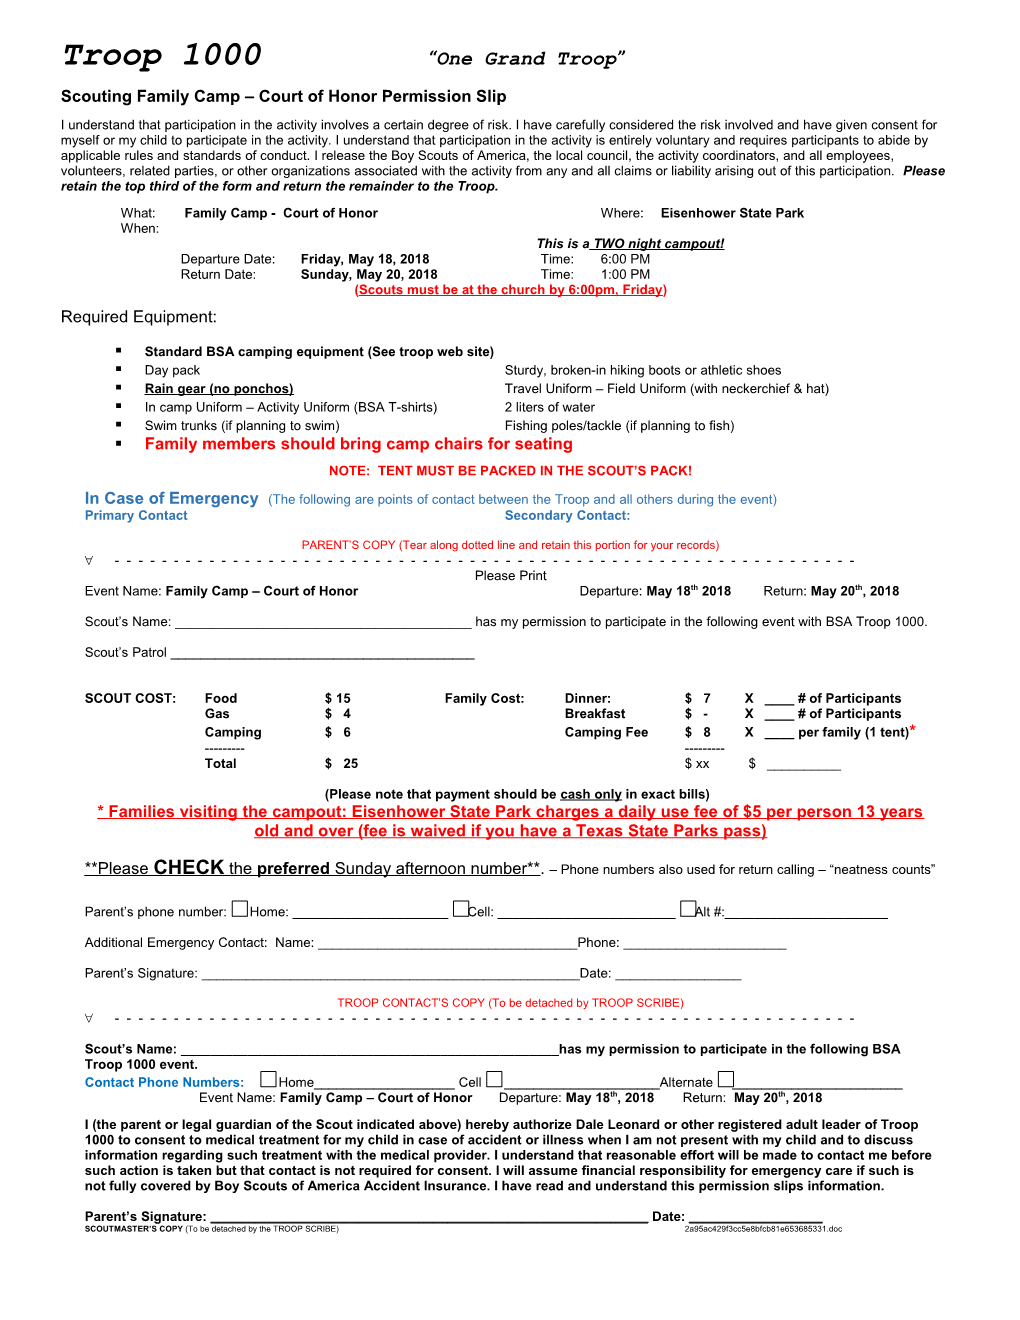 Scouting Family Camp Court of Honor Permission Slip